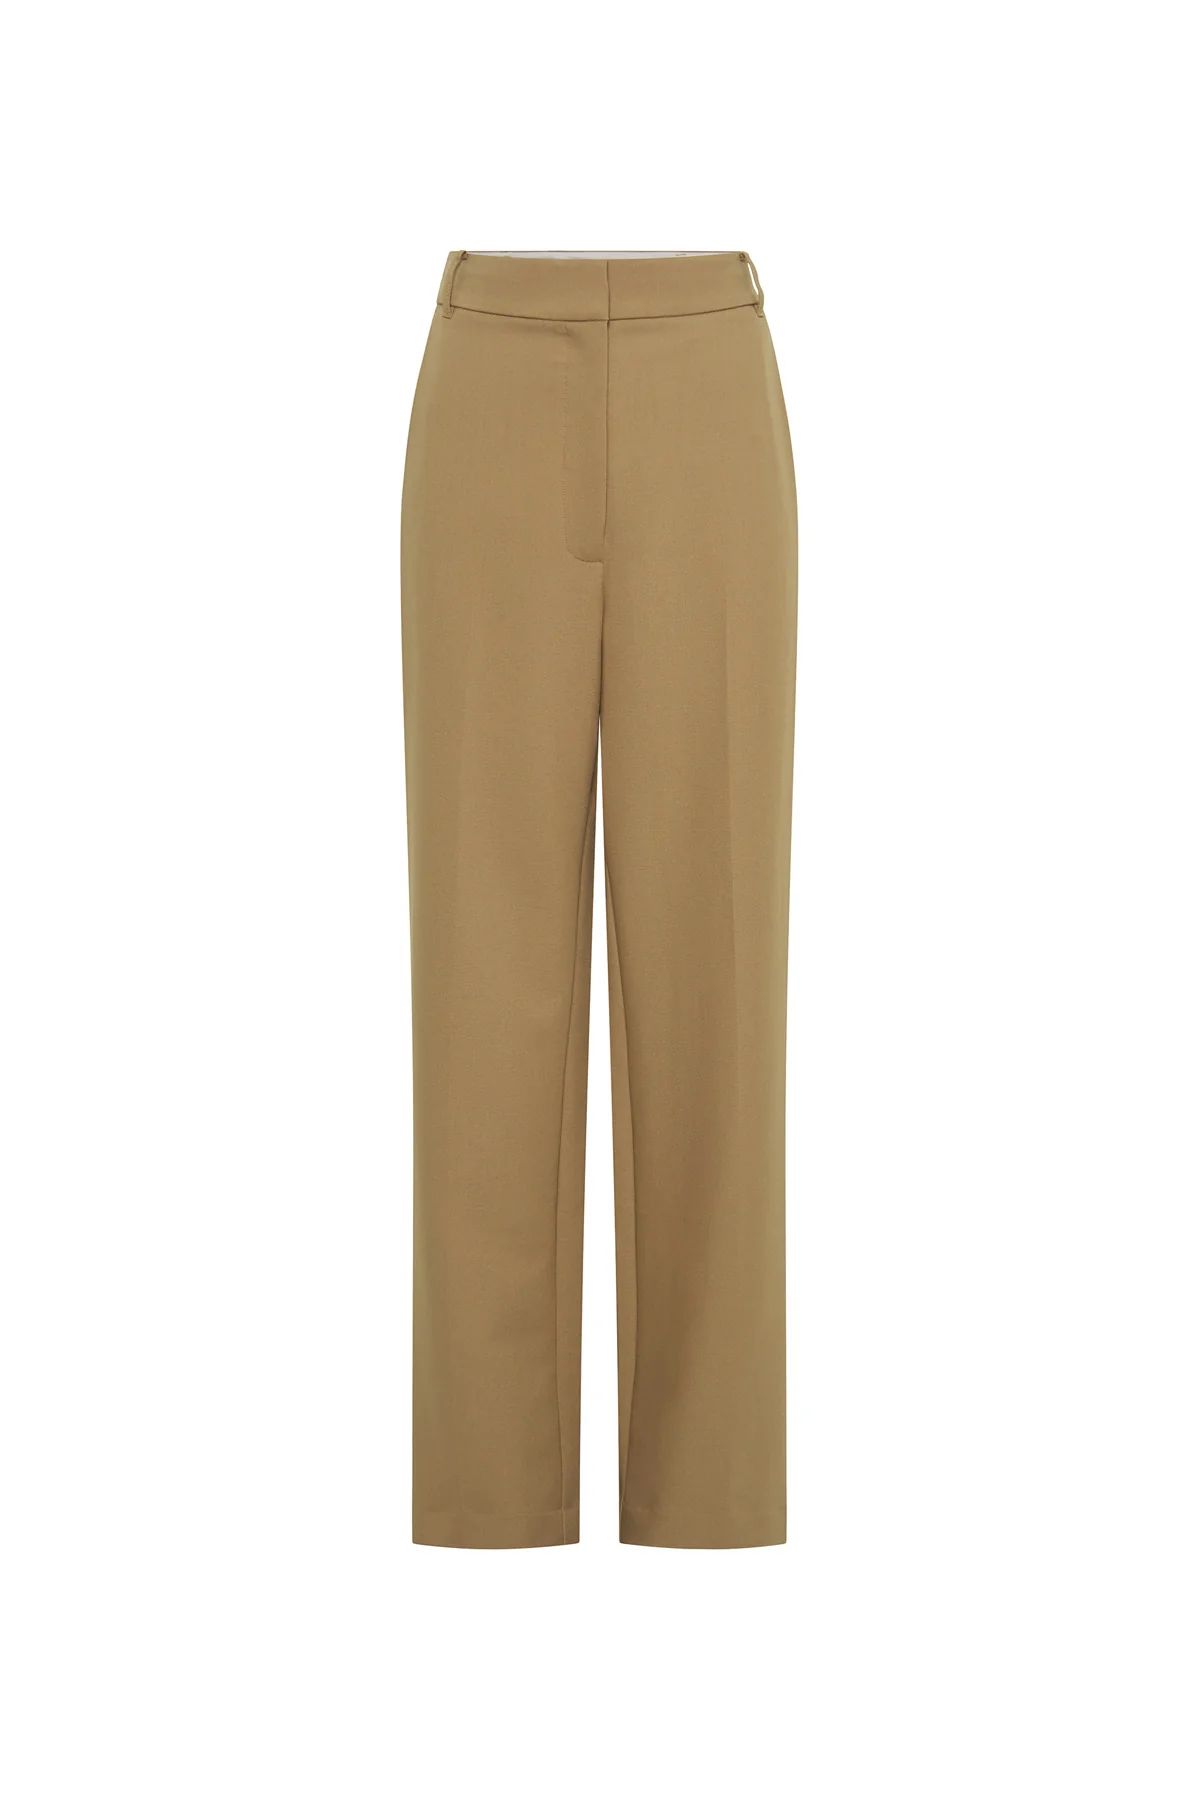 Mackinley Pant | Camilla and Marc